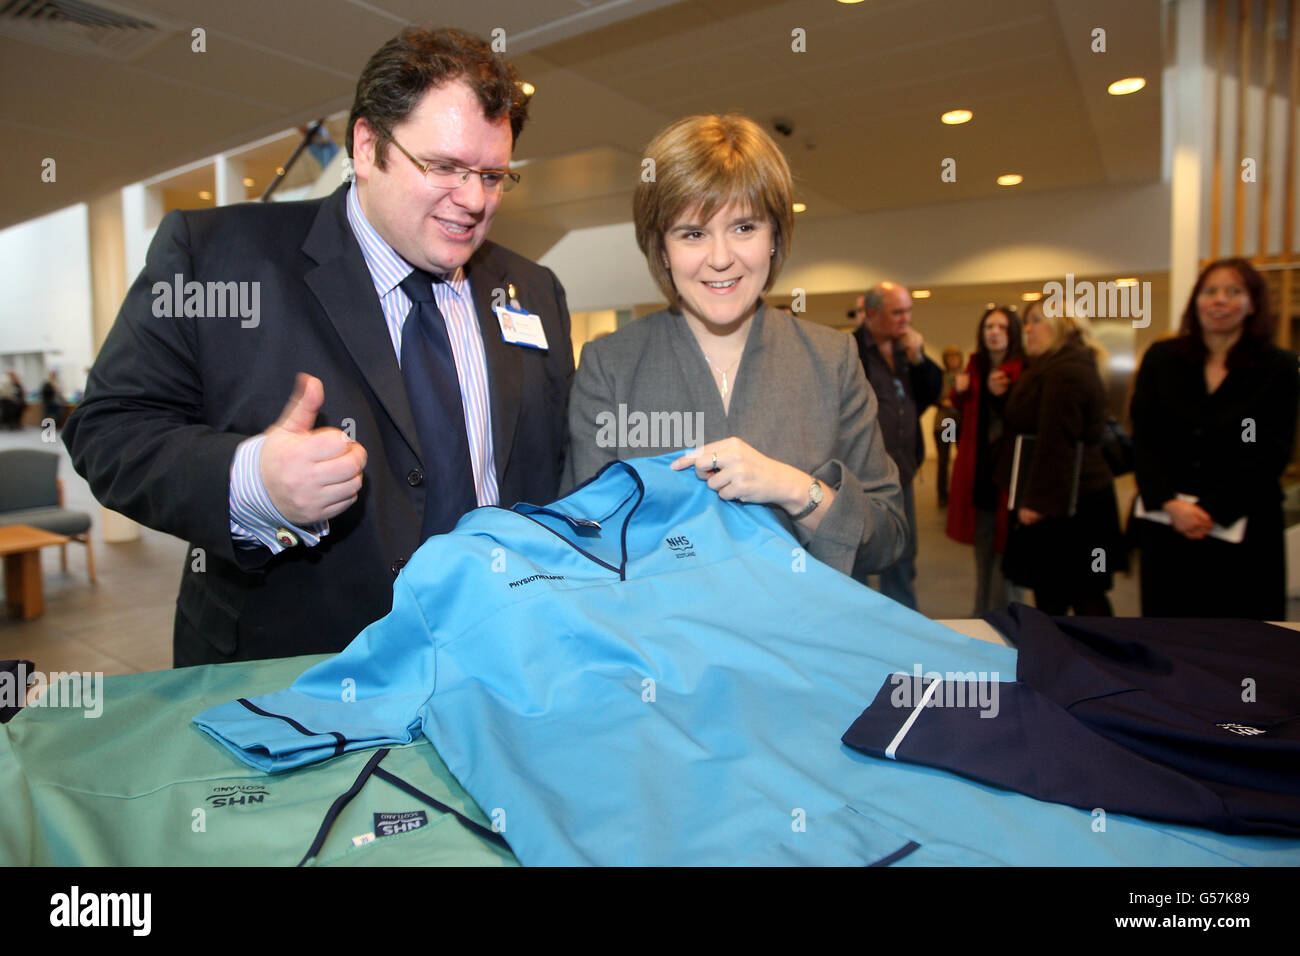 Health Secretary Nicola Sturgeon talks to Director of Nursing Rory Farrelly (l) during a visit to the New Stobhill Hospital in Glasgow to launch of the new NHS Scotland national uniforms Stock Photo